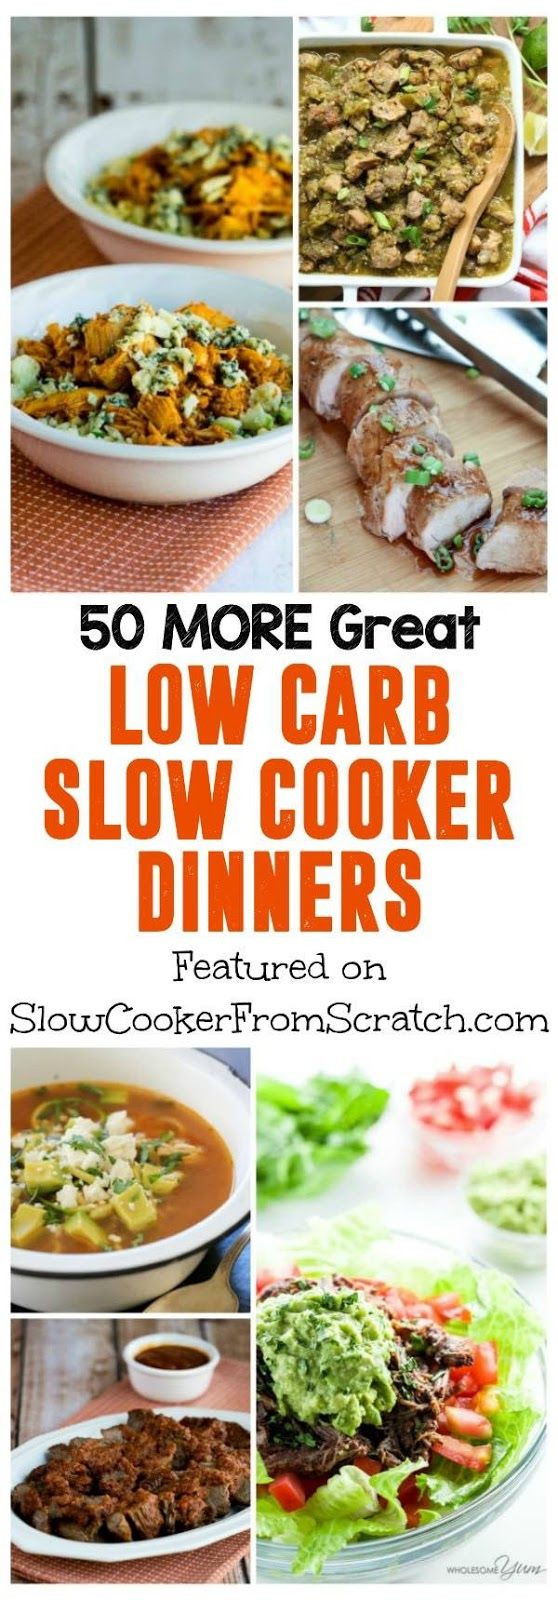 Healthy Low Carb Slow Cooker Recipes
 Best 20 Members of the family ideas on Pinterest